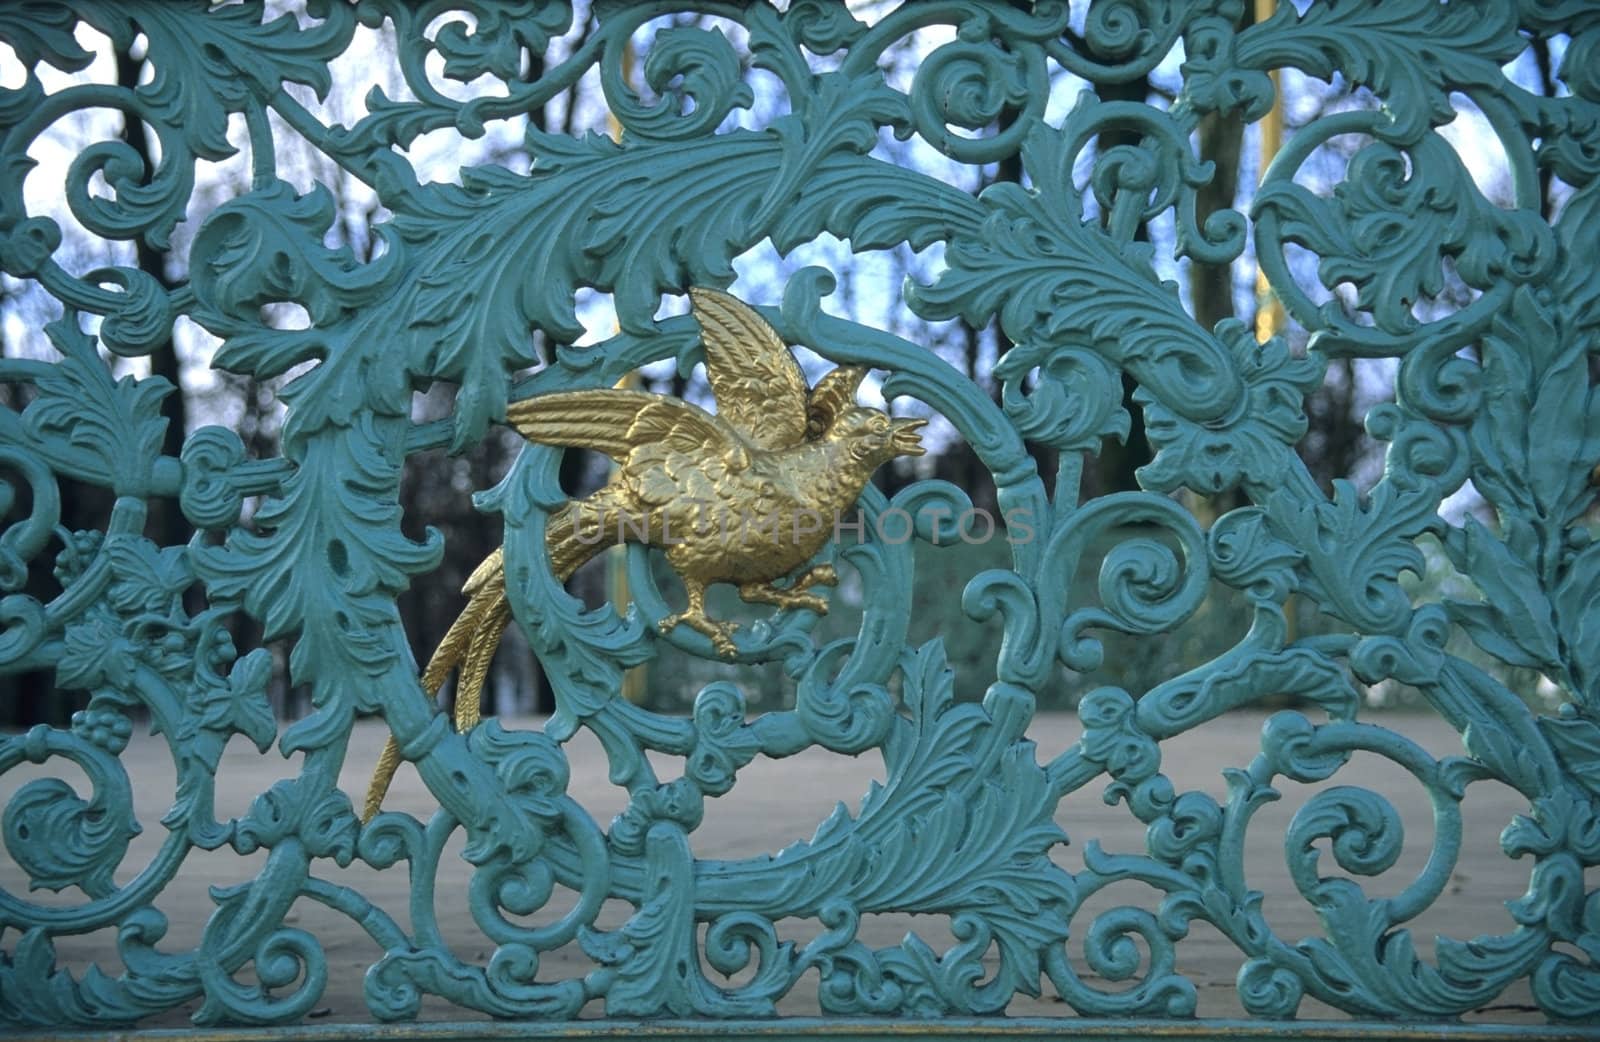 Detail of ironwork on a bandstand in Brussels, Belgium.